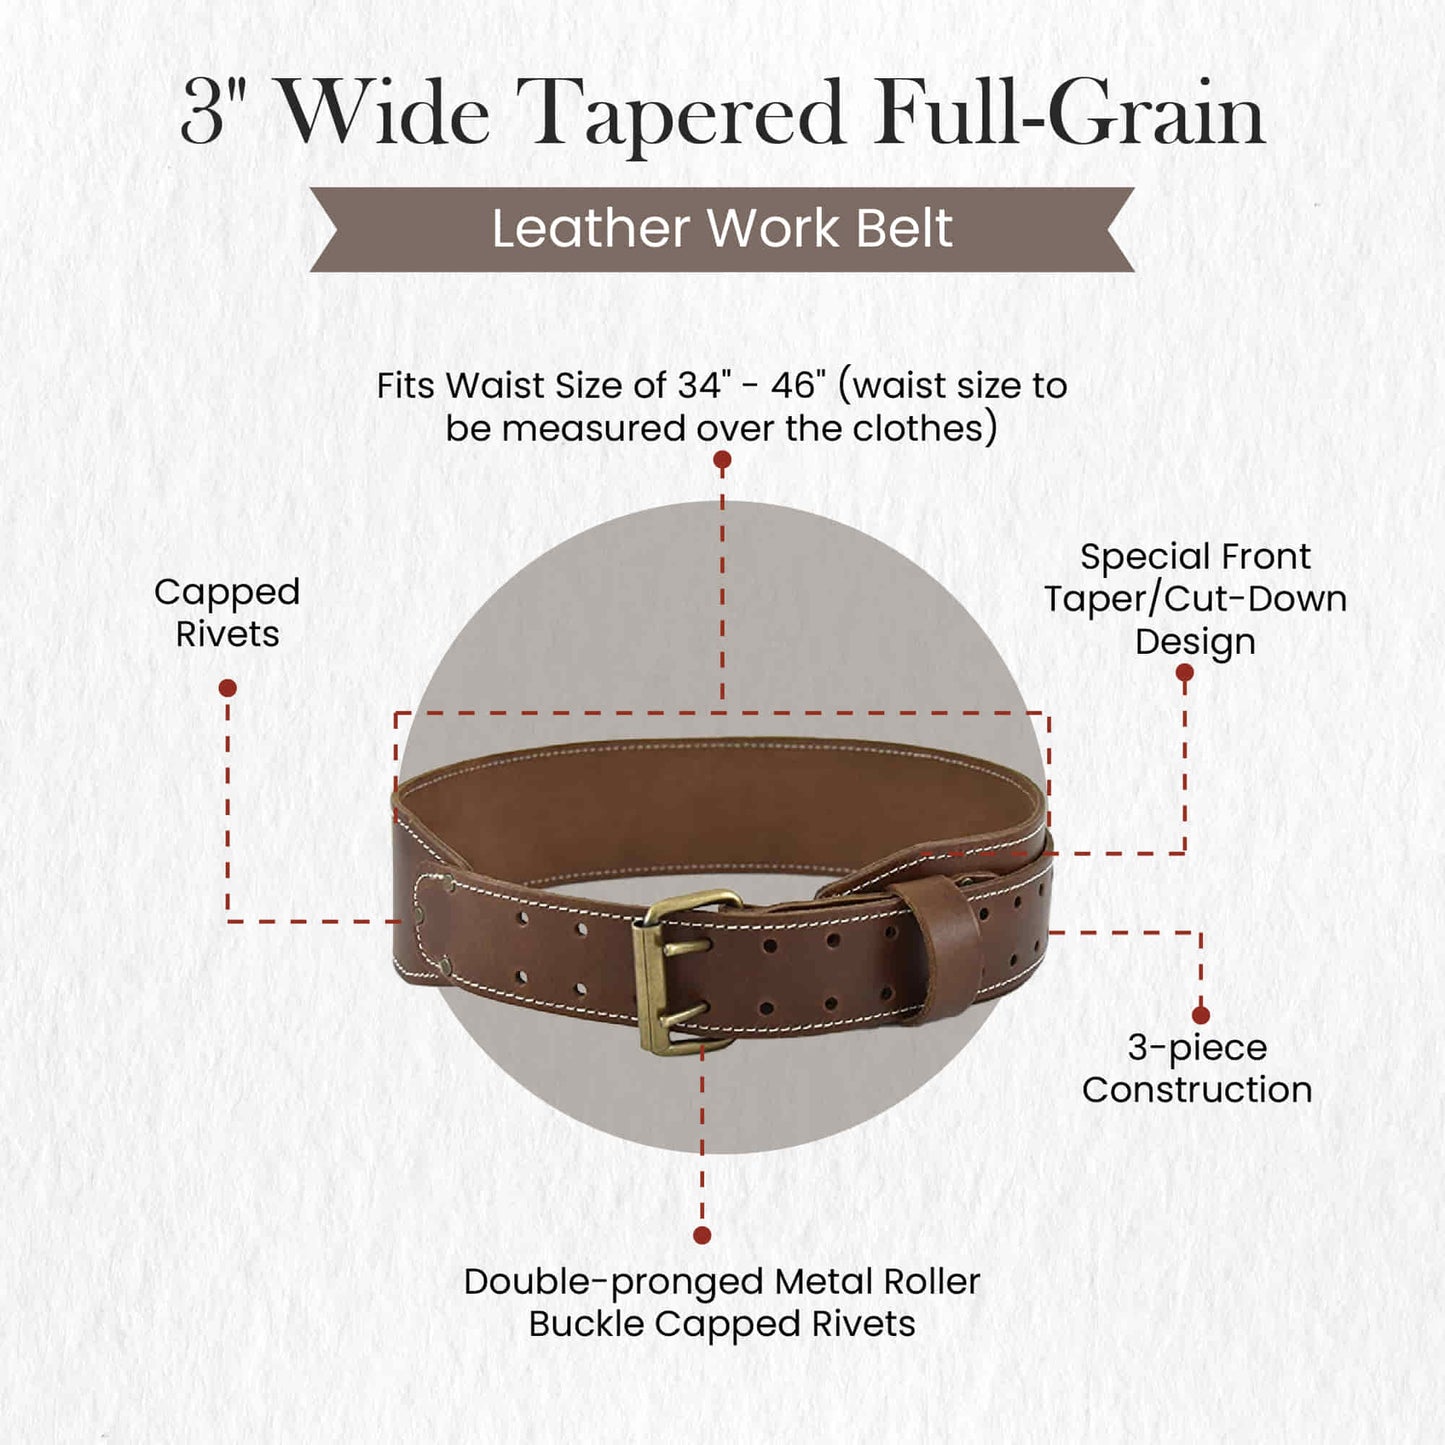 Style n Craft 98437 - 3 Inch Wide Tapered Work Belt in Heavy Top Grain Leather in Dark Tan Color - Front View Showing Details